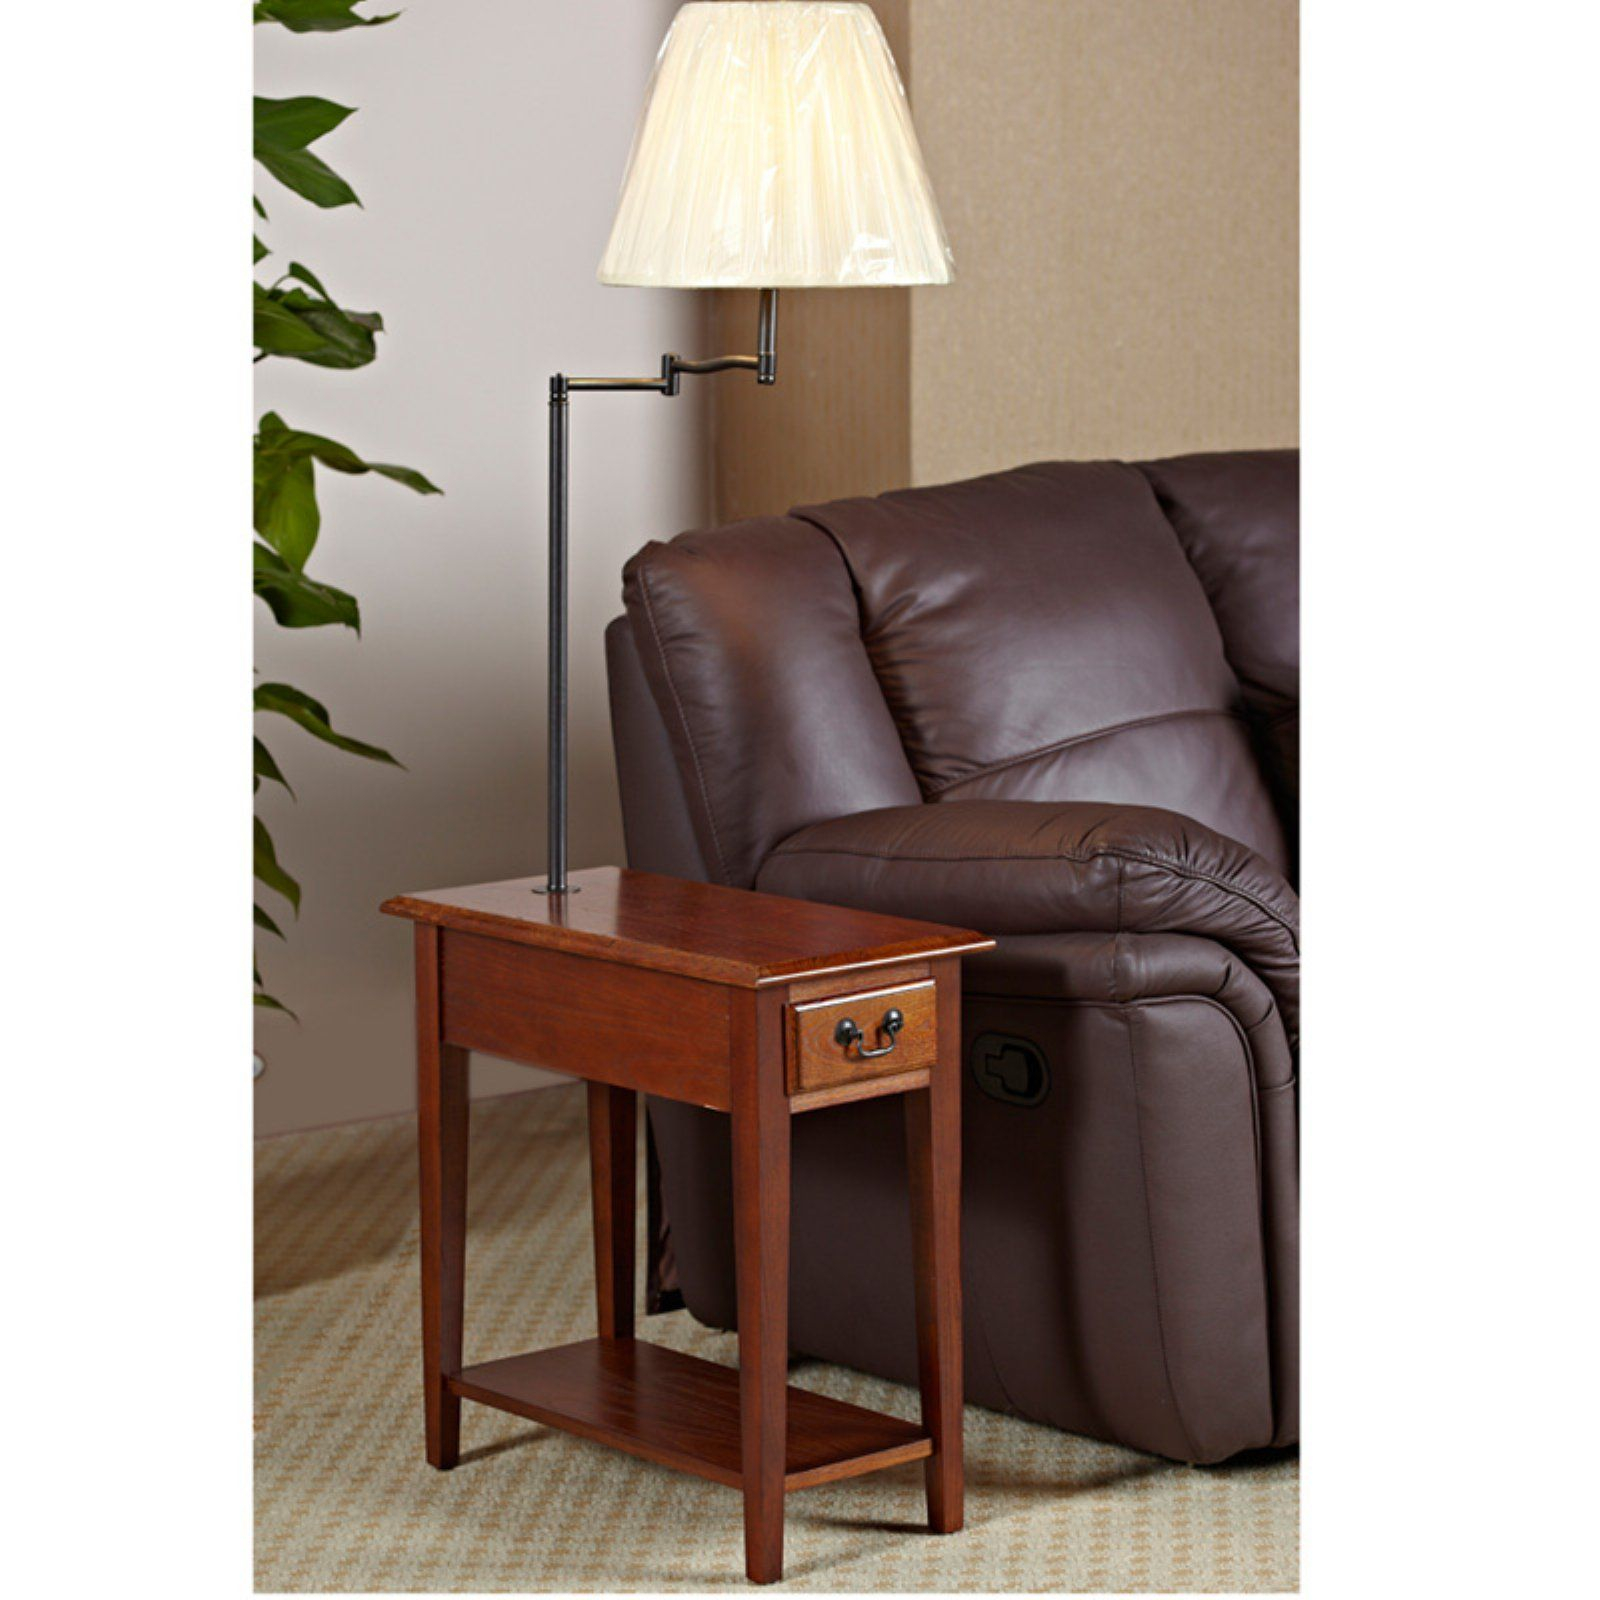 Leick Home Chairside Oak End Table With Swing Arm Lamp In regarding dimensions 1600 X 1600